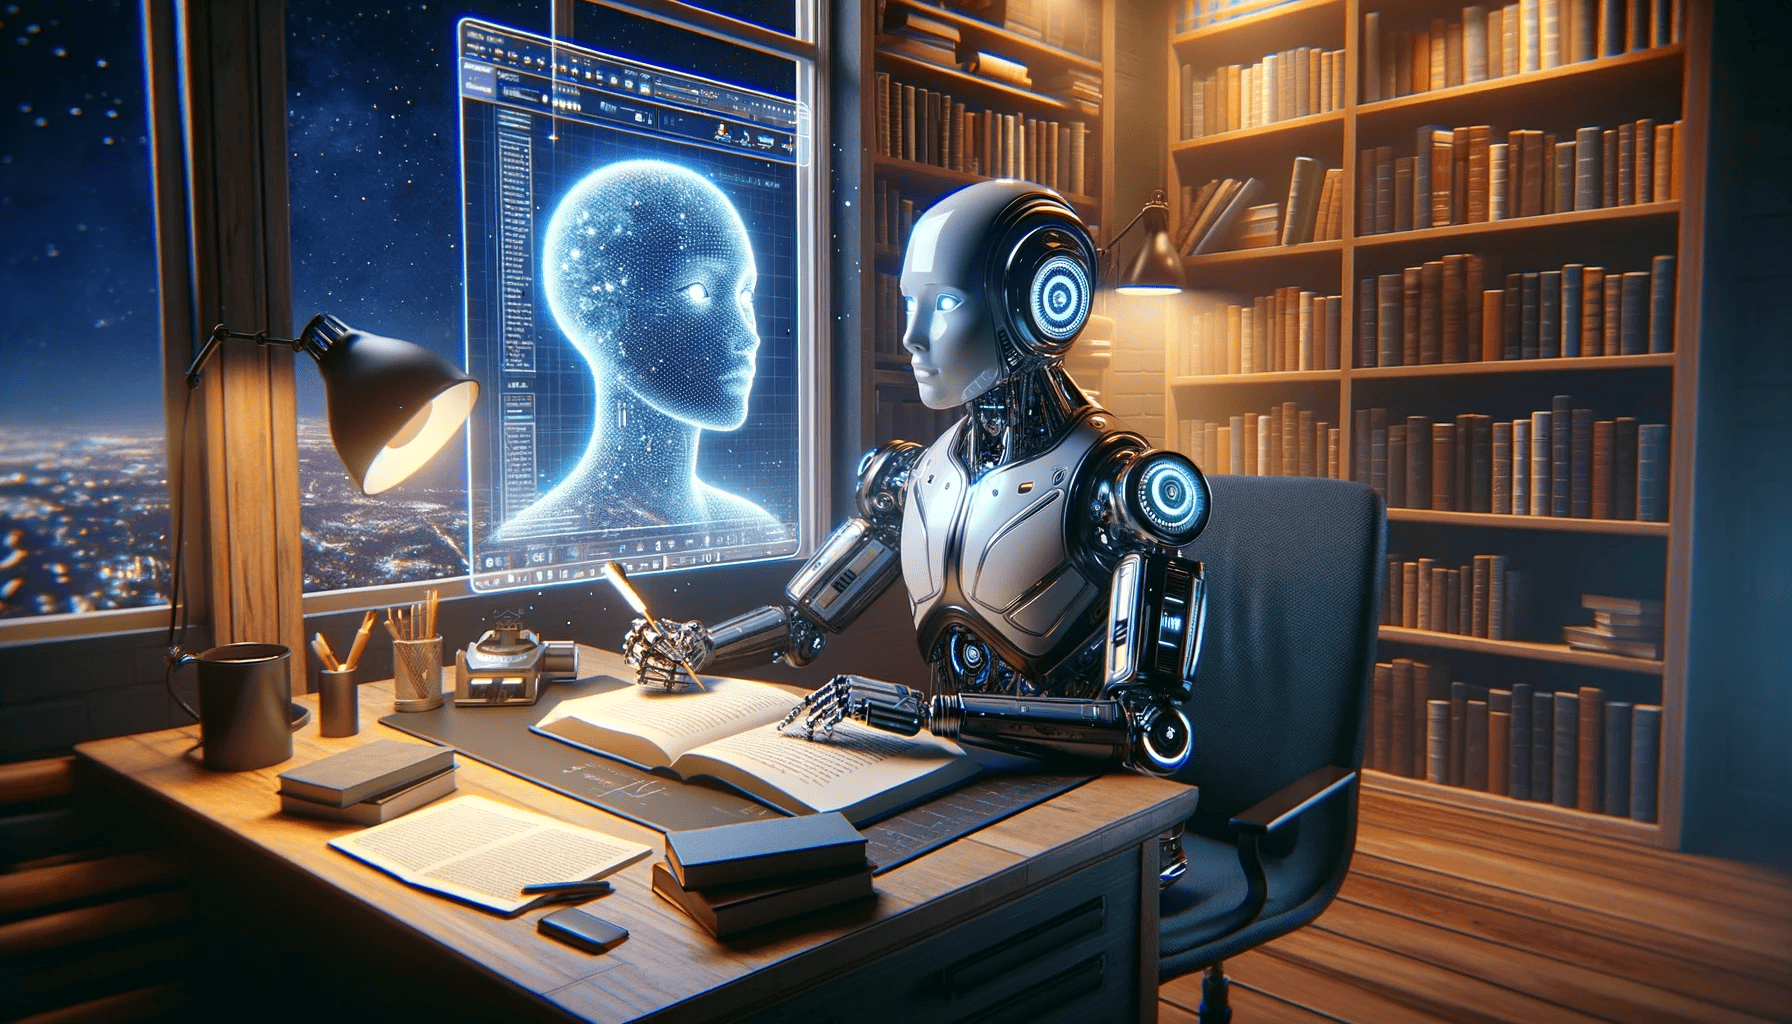 Sudowrite Vs NovelAI: Which One is the Best AI Writing Assistant?